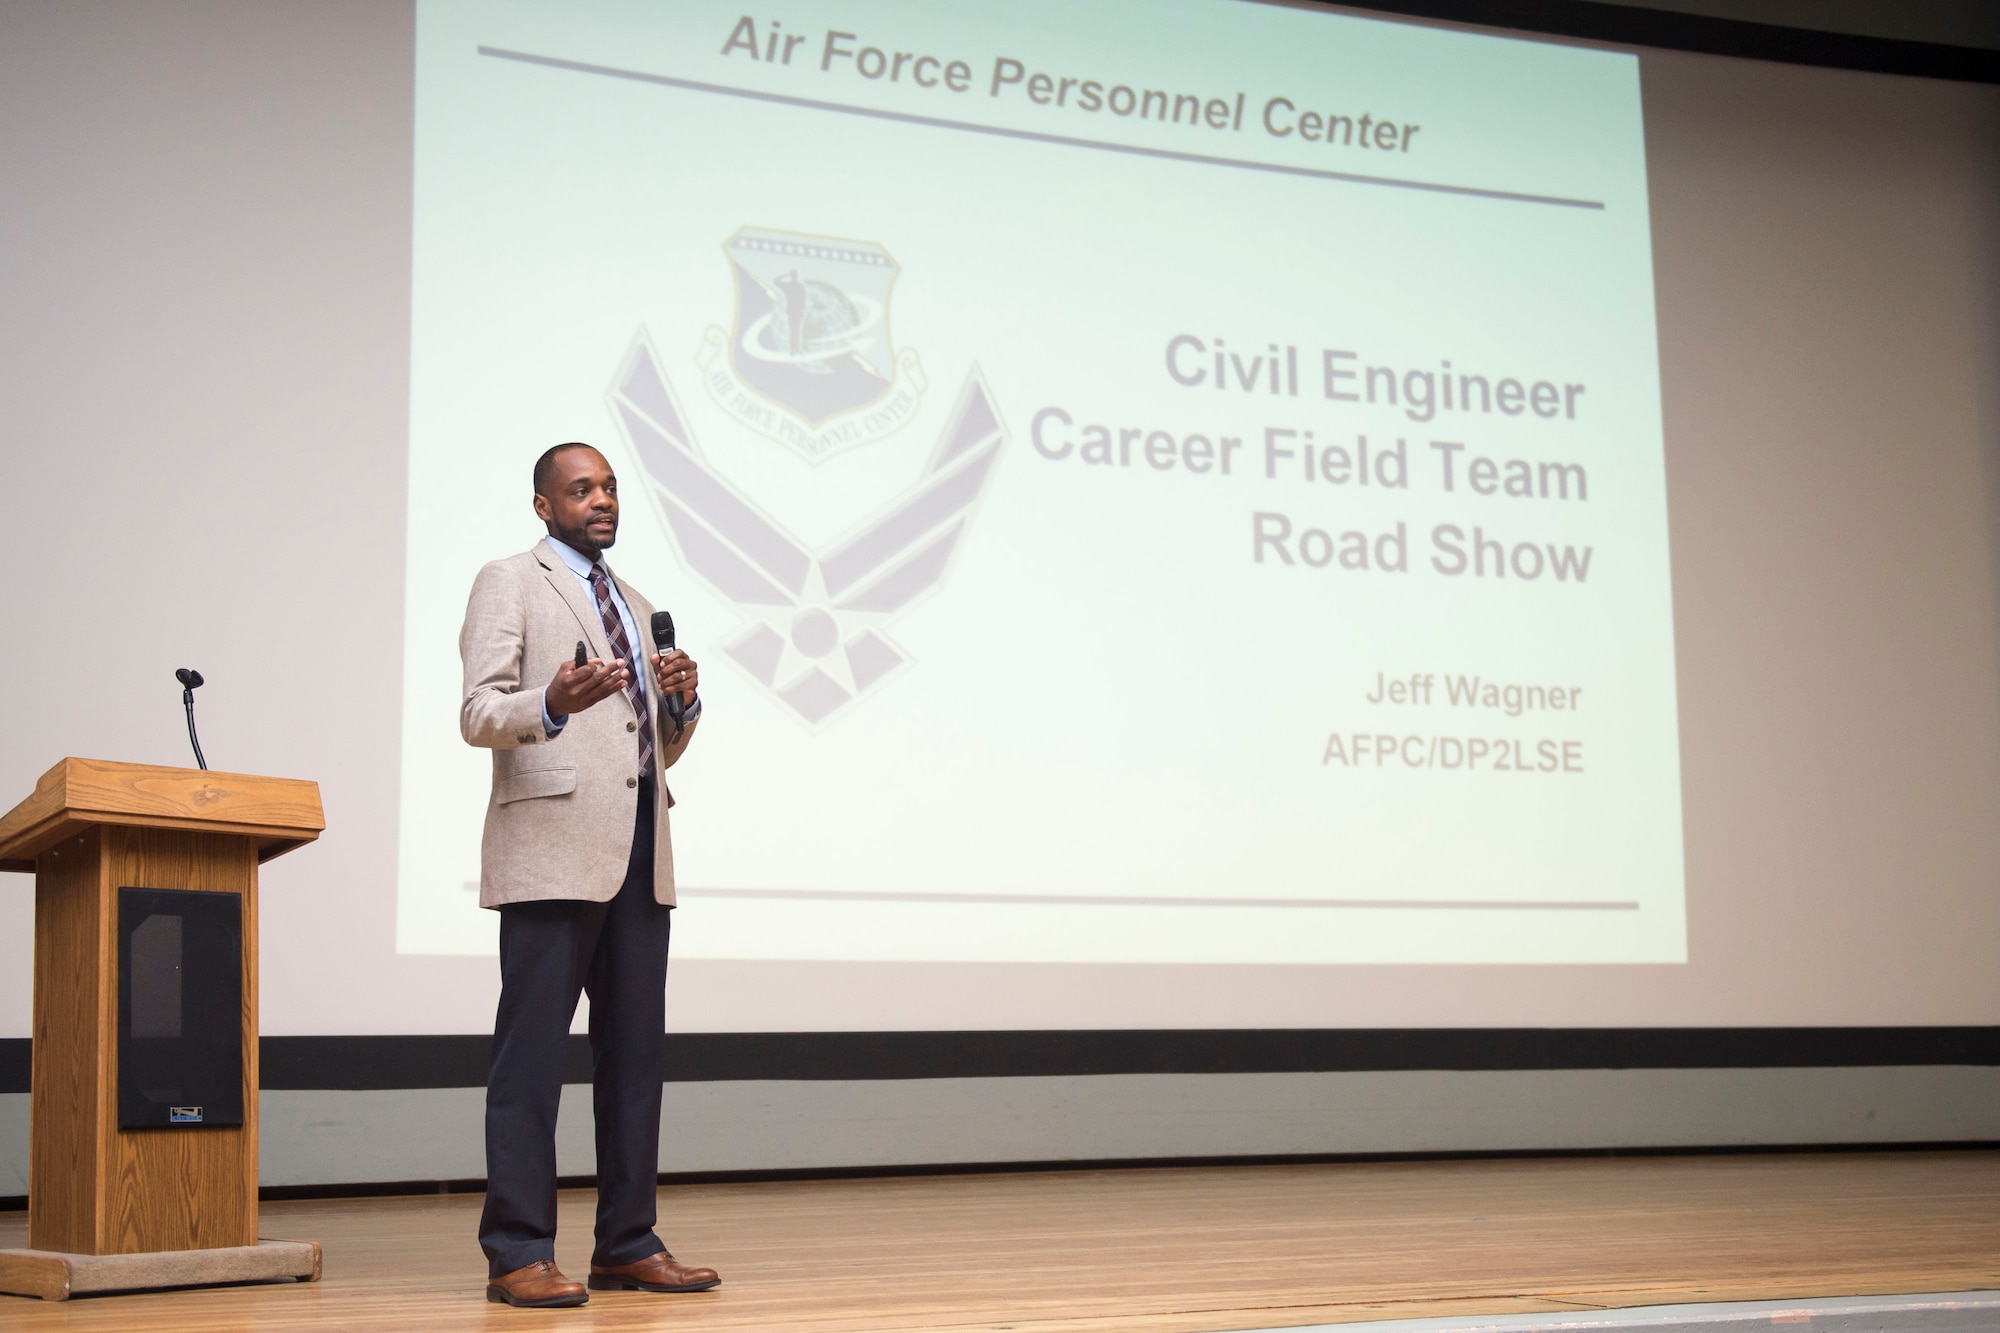 Jabuaar Rorie, Air Force Personnel Center Civil Engineer career field advisor, speaks to an audience at the base theater April 6. Rorie was part of a two-man team who visited Edwards as part of the Civil Engineer Career Field Team Road Show, which provides insight to CE personnel on career management and development. (U.S. Air Force photo by Ethan Wagner)